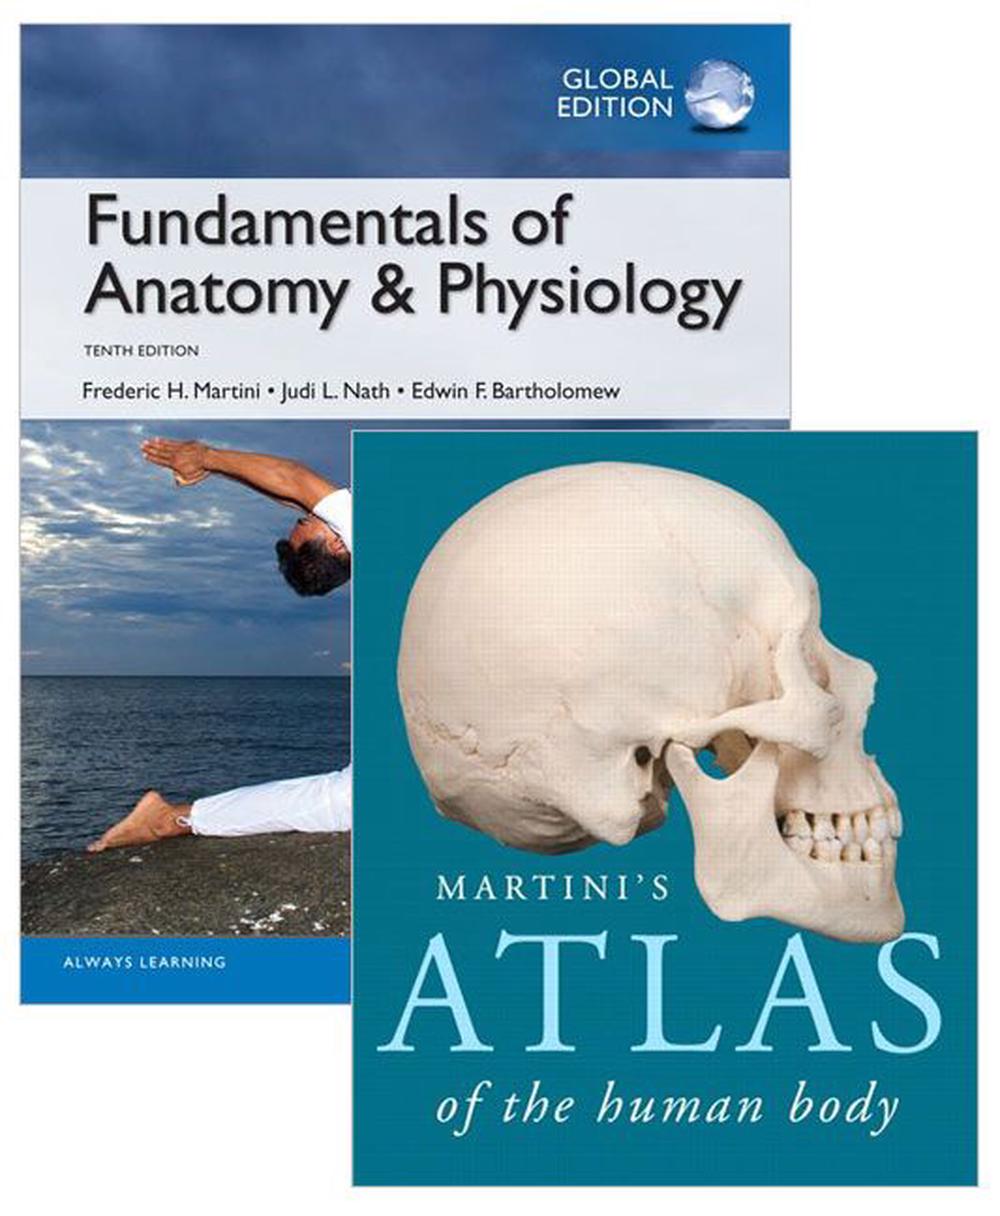 Value Pack Fundamentals of Anatomy and Physiology (Global Edition